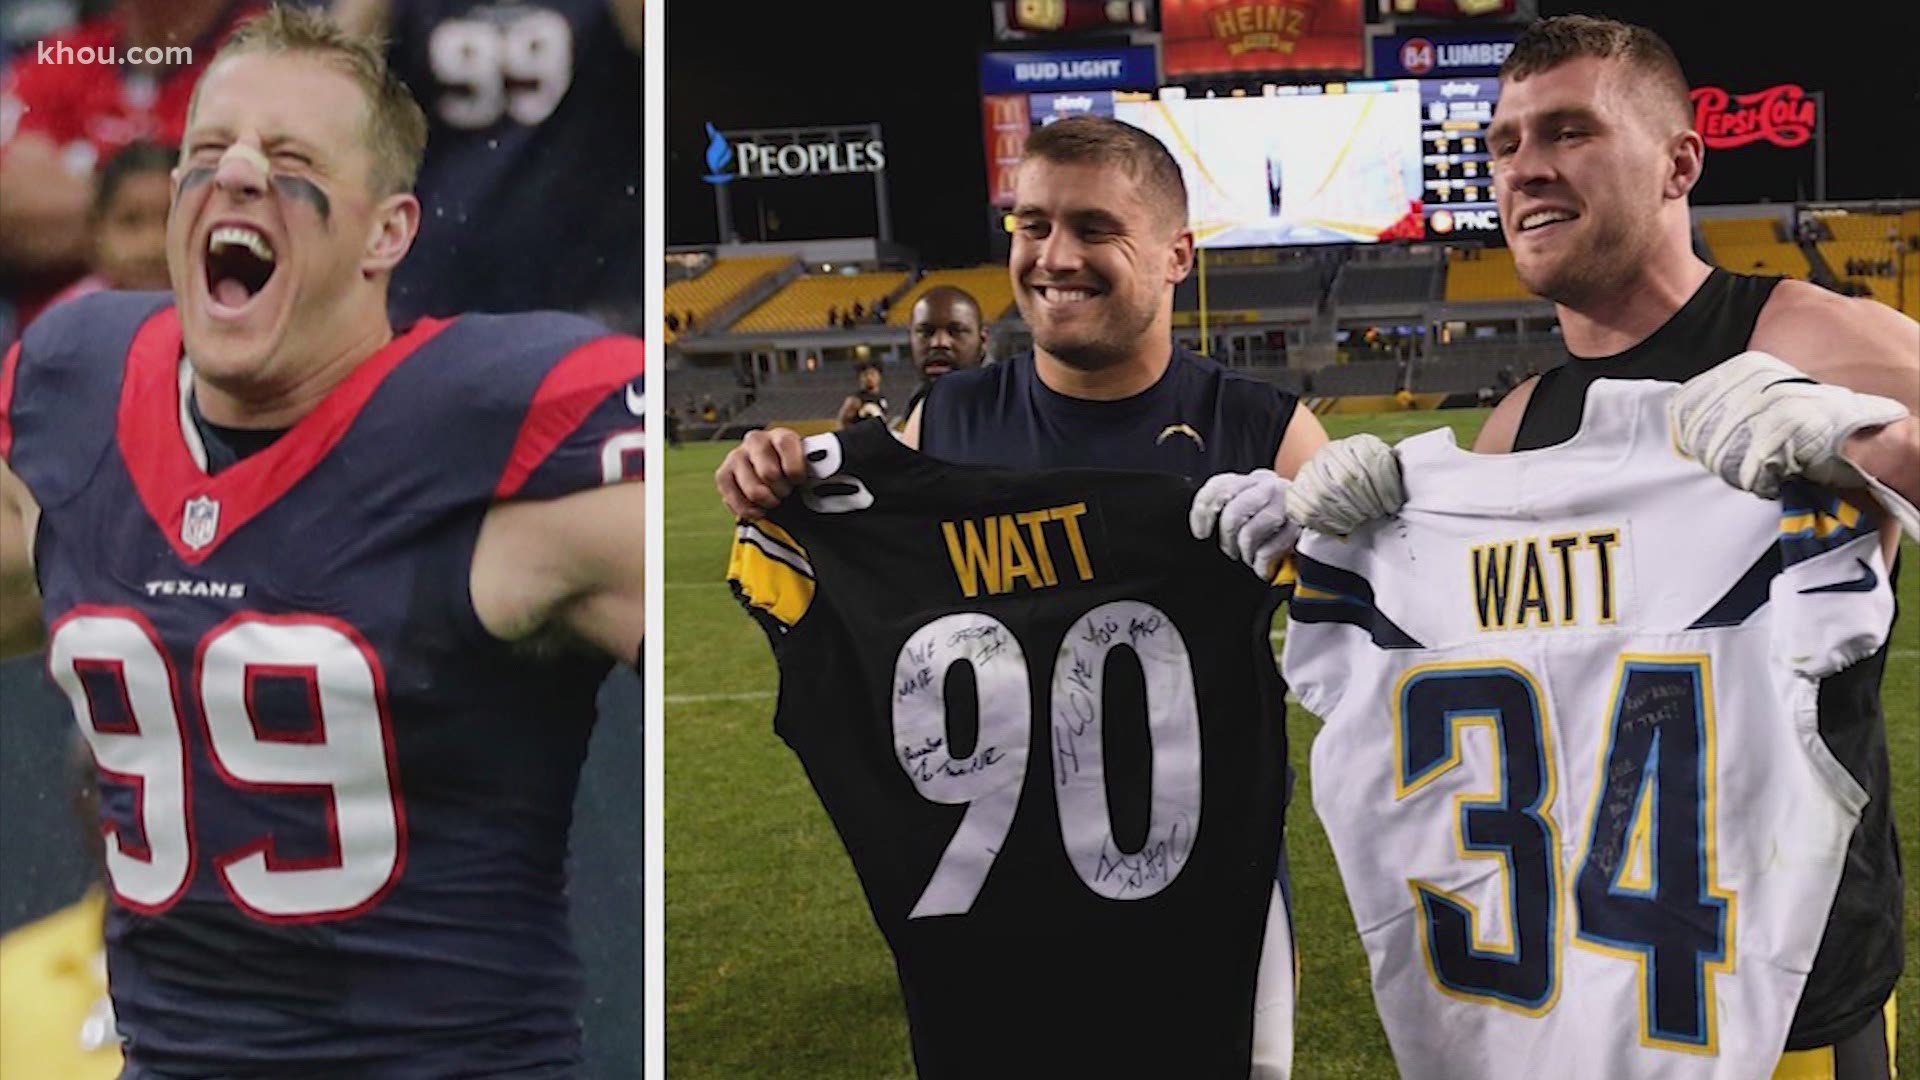 When Houston Texans defensive end J.J. Watt takes the field against the Pittsburgh Steelers on Sunday, he will do so opposite his brothers, T.J. and Derek Watt.